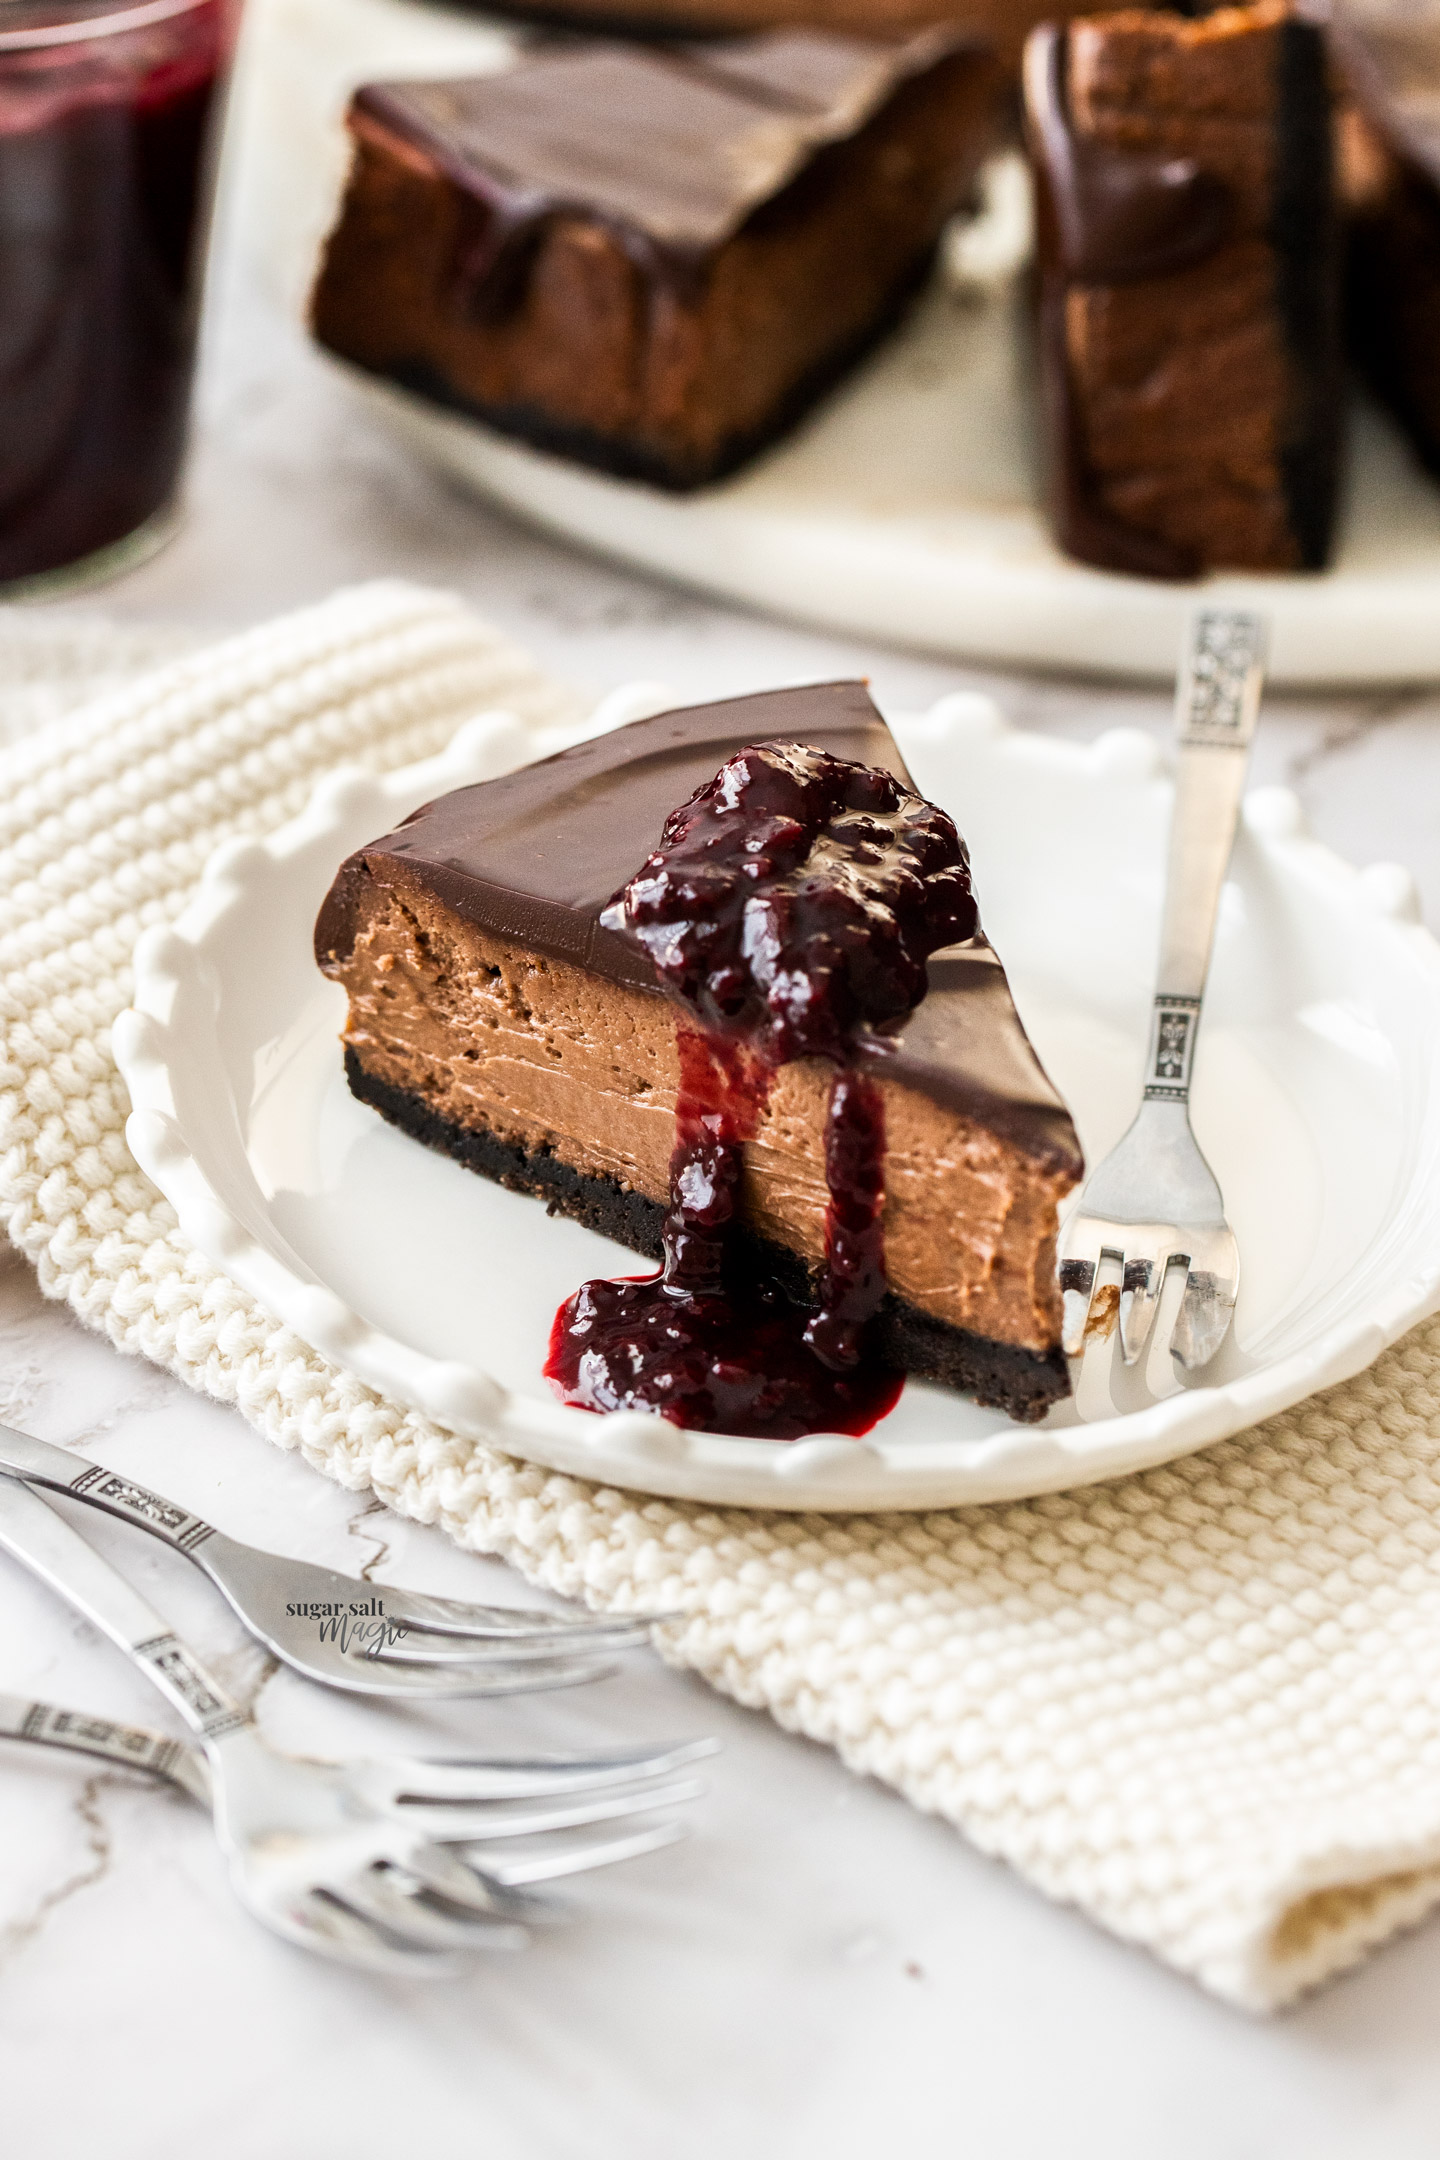 A slice of chocolate cheesecake topped with compote.